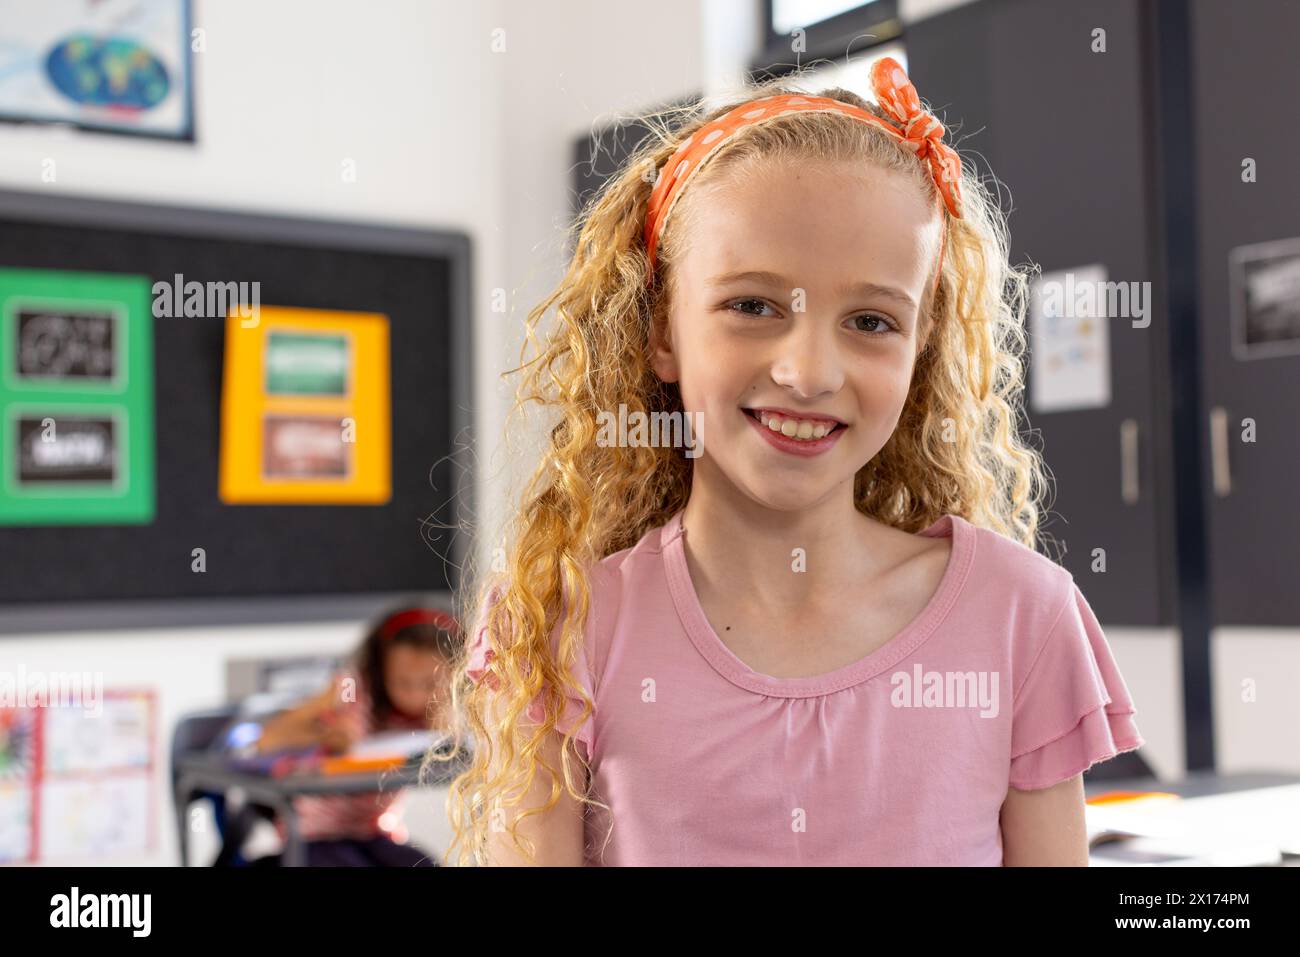 In school, young Caucasian girl with curly blonde hair is smiling in a classroom Stock Photo